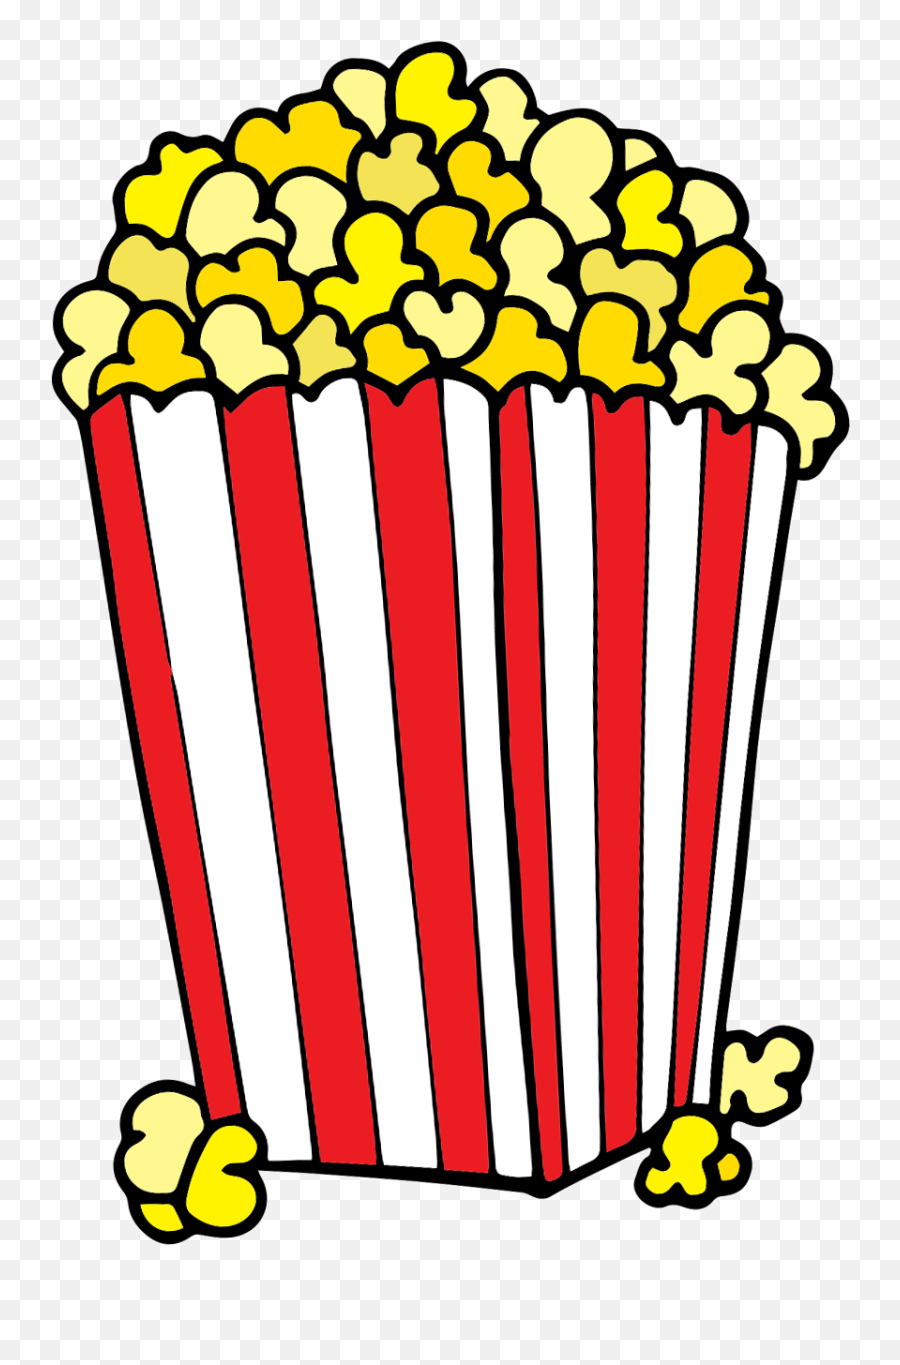 Movie Theater Popcorn Clip Art 1 - For Party Emoji,Movie Theater Clipart